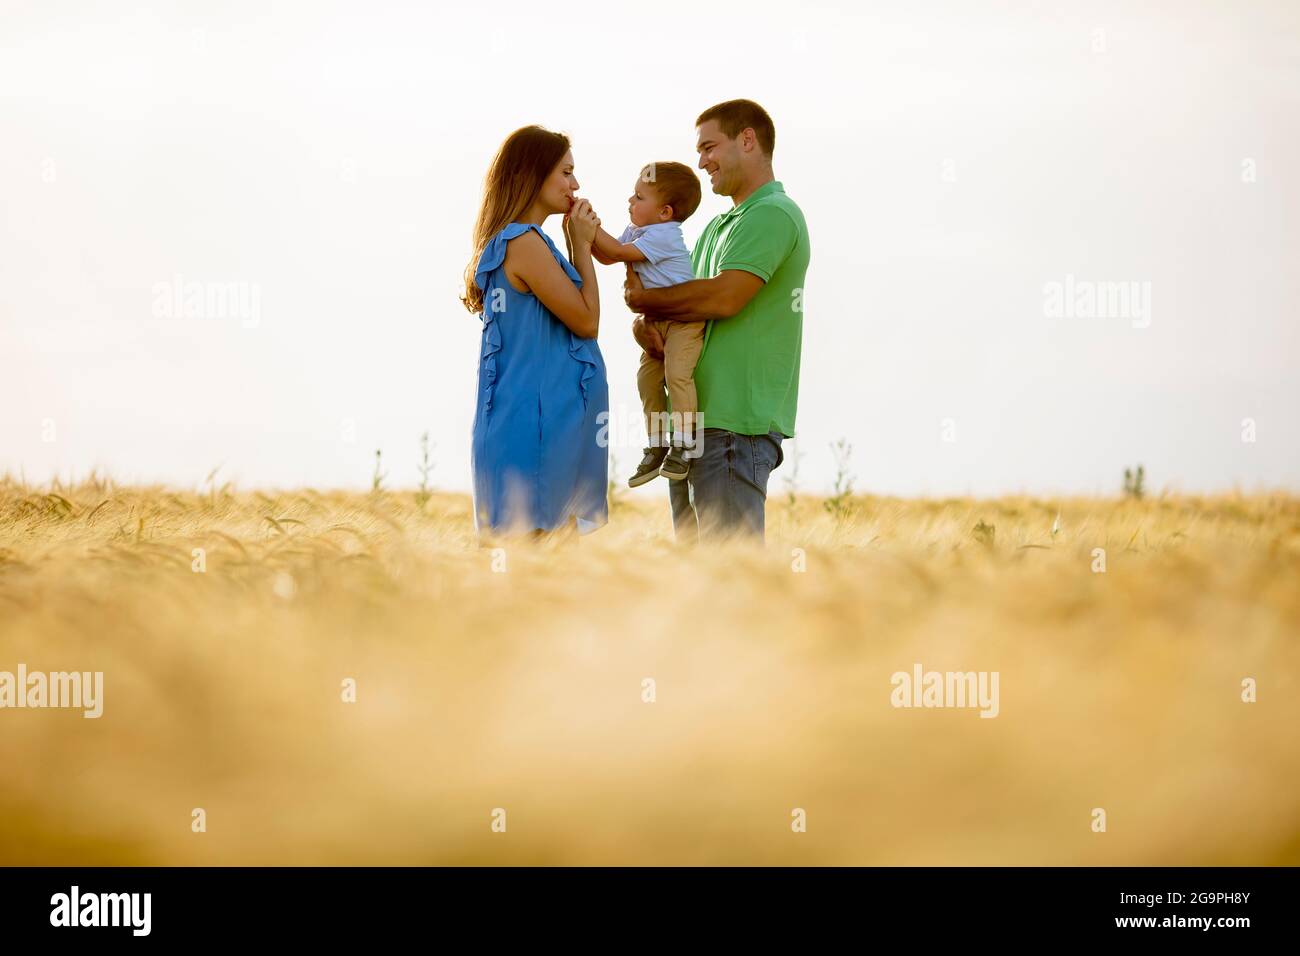 Young family with cute little boy having fun outdoors in the summer field Stock Photo